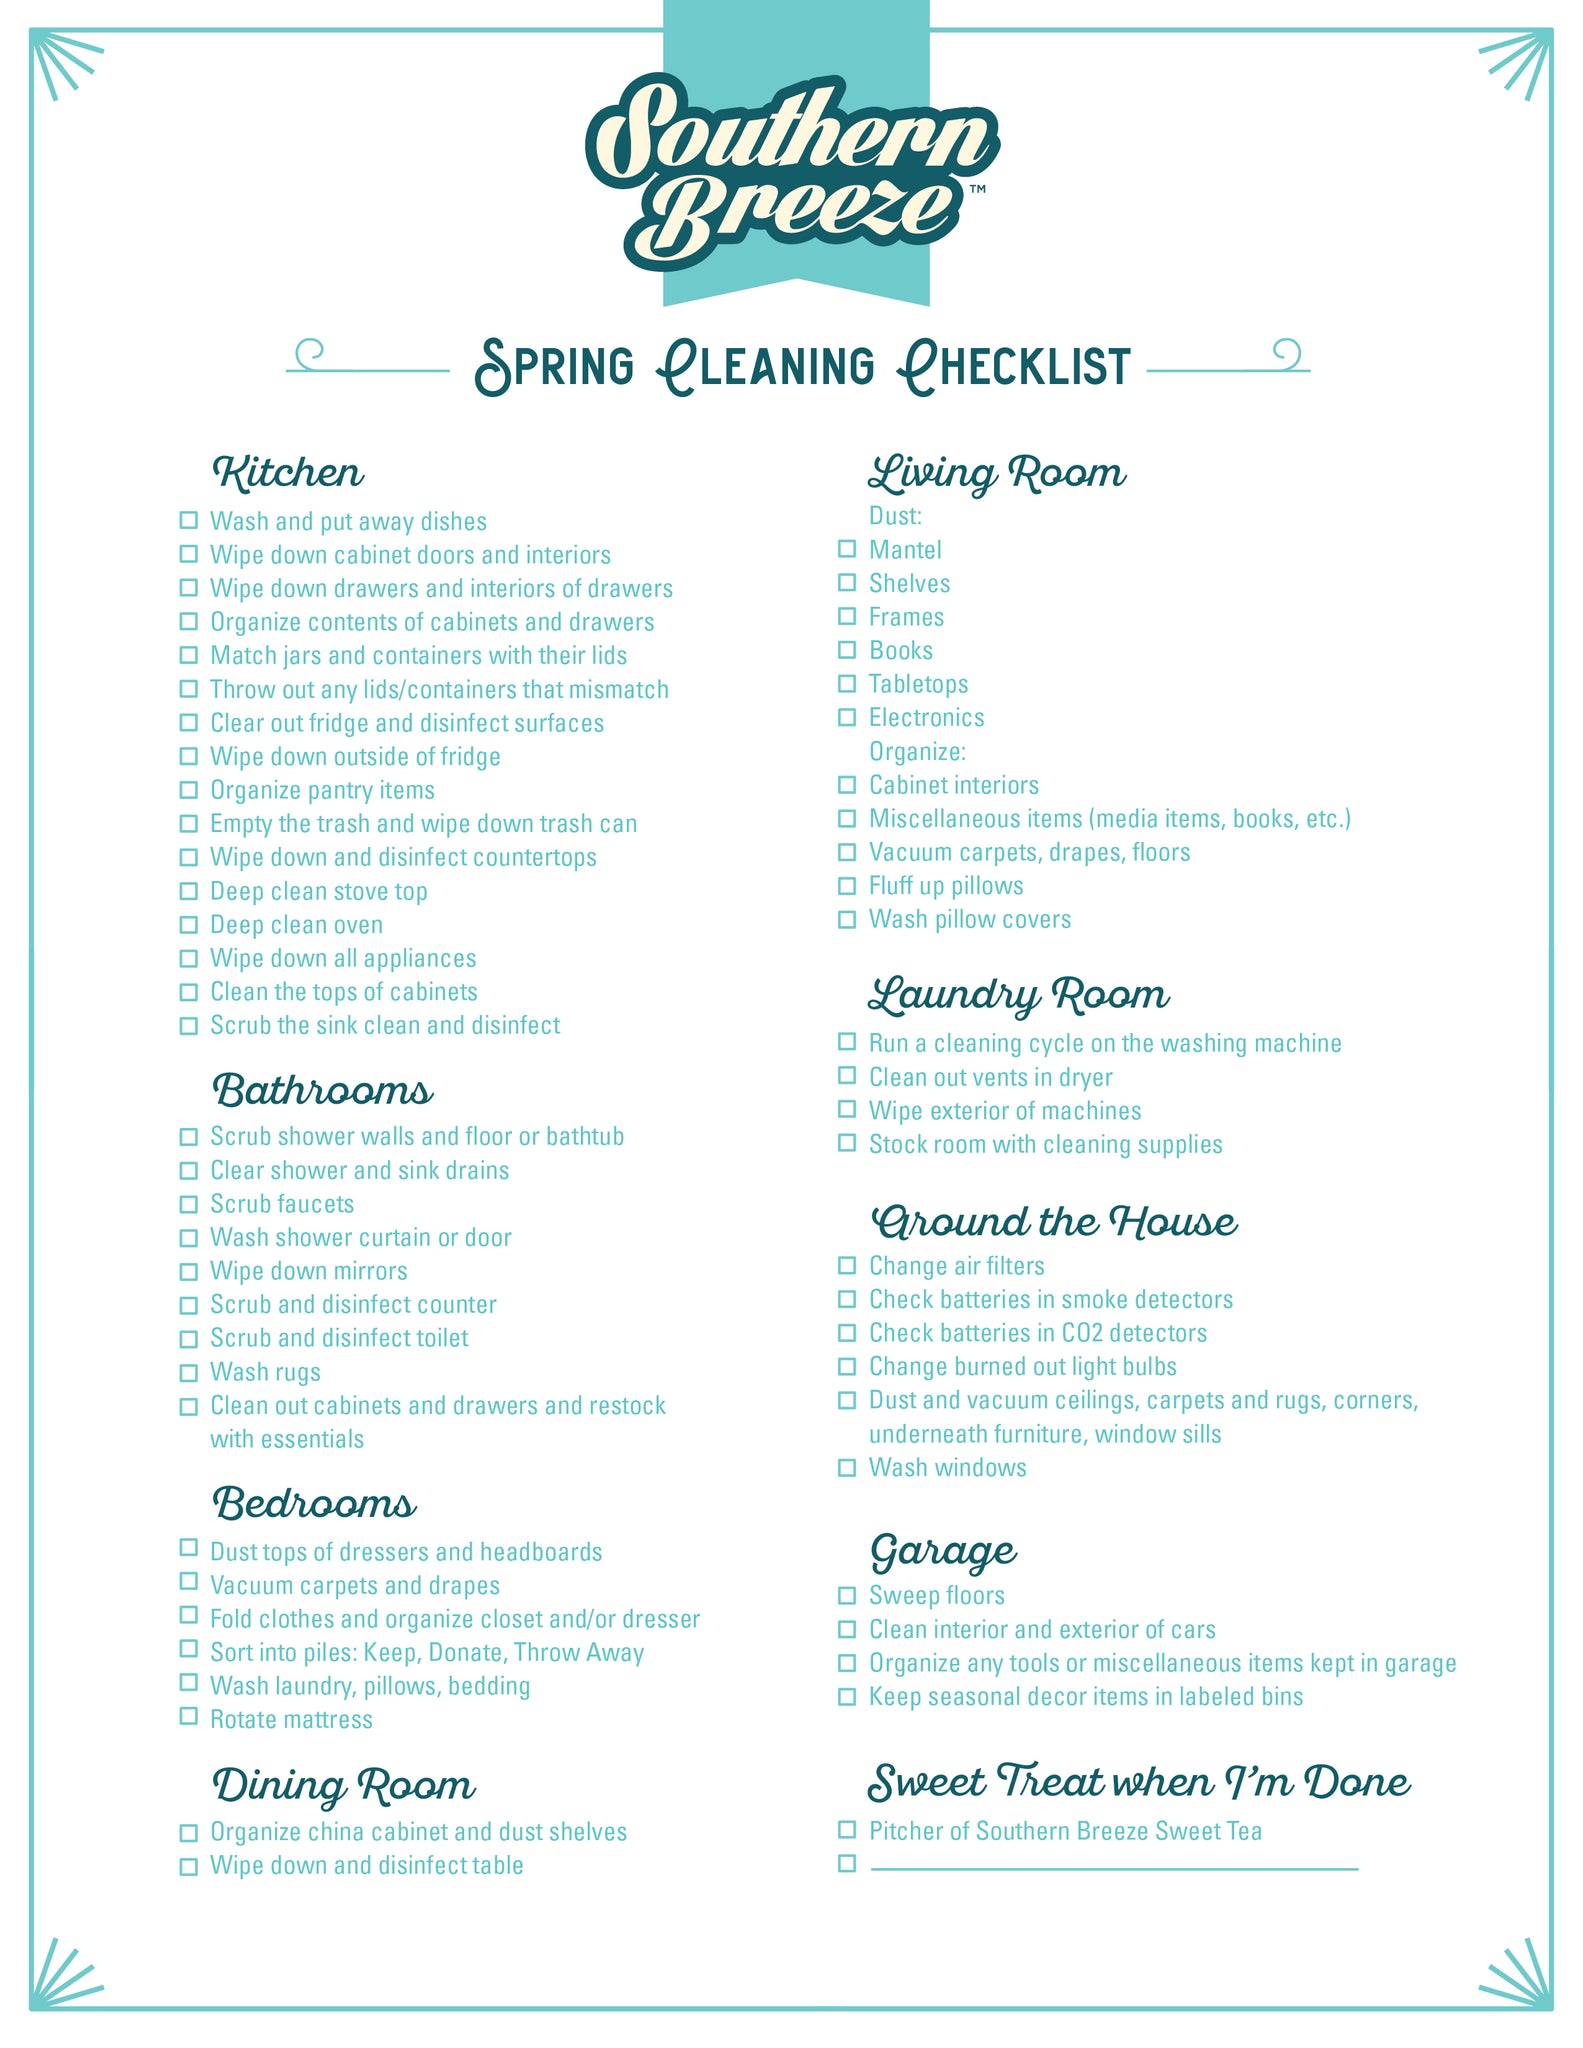 Printable Cleaning Checklist